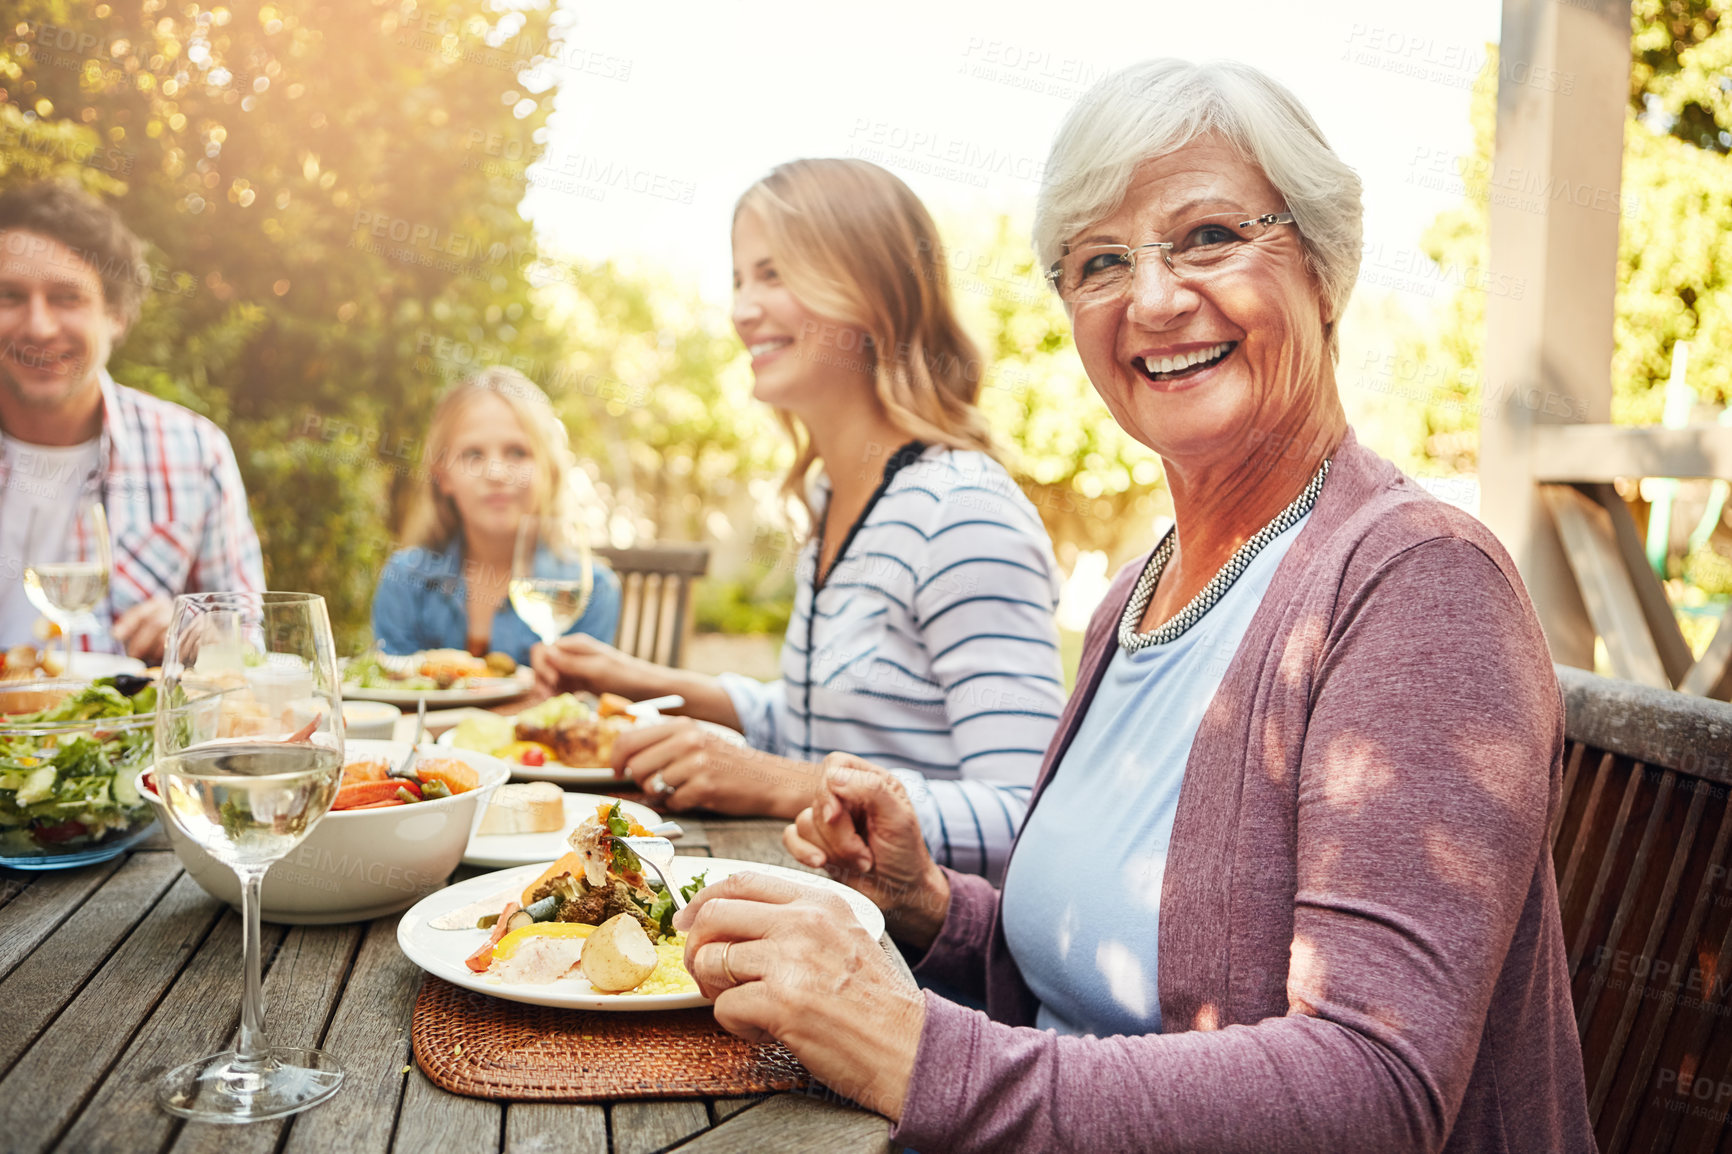 Buy stock photo Portrait of a happy elderly woman enjoying an outdoor lunch with her family